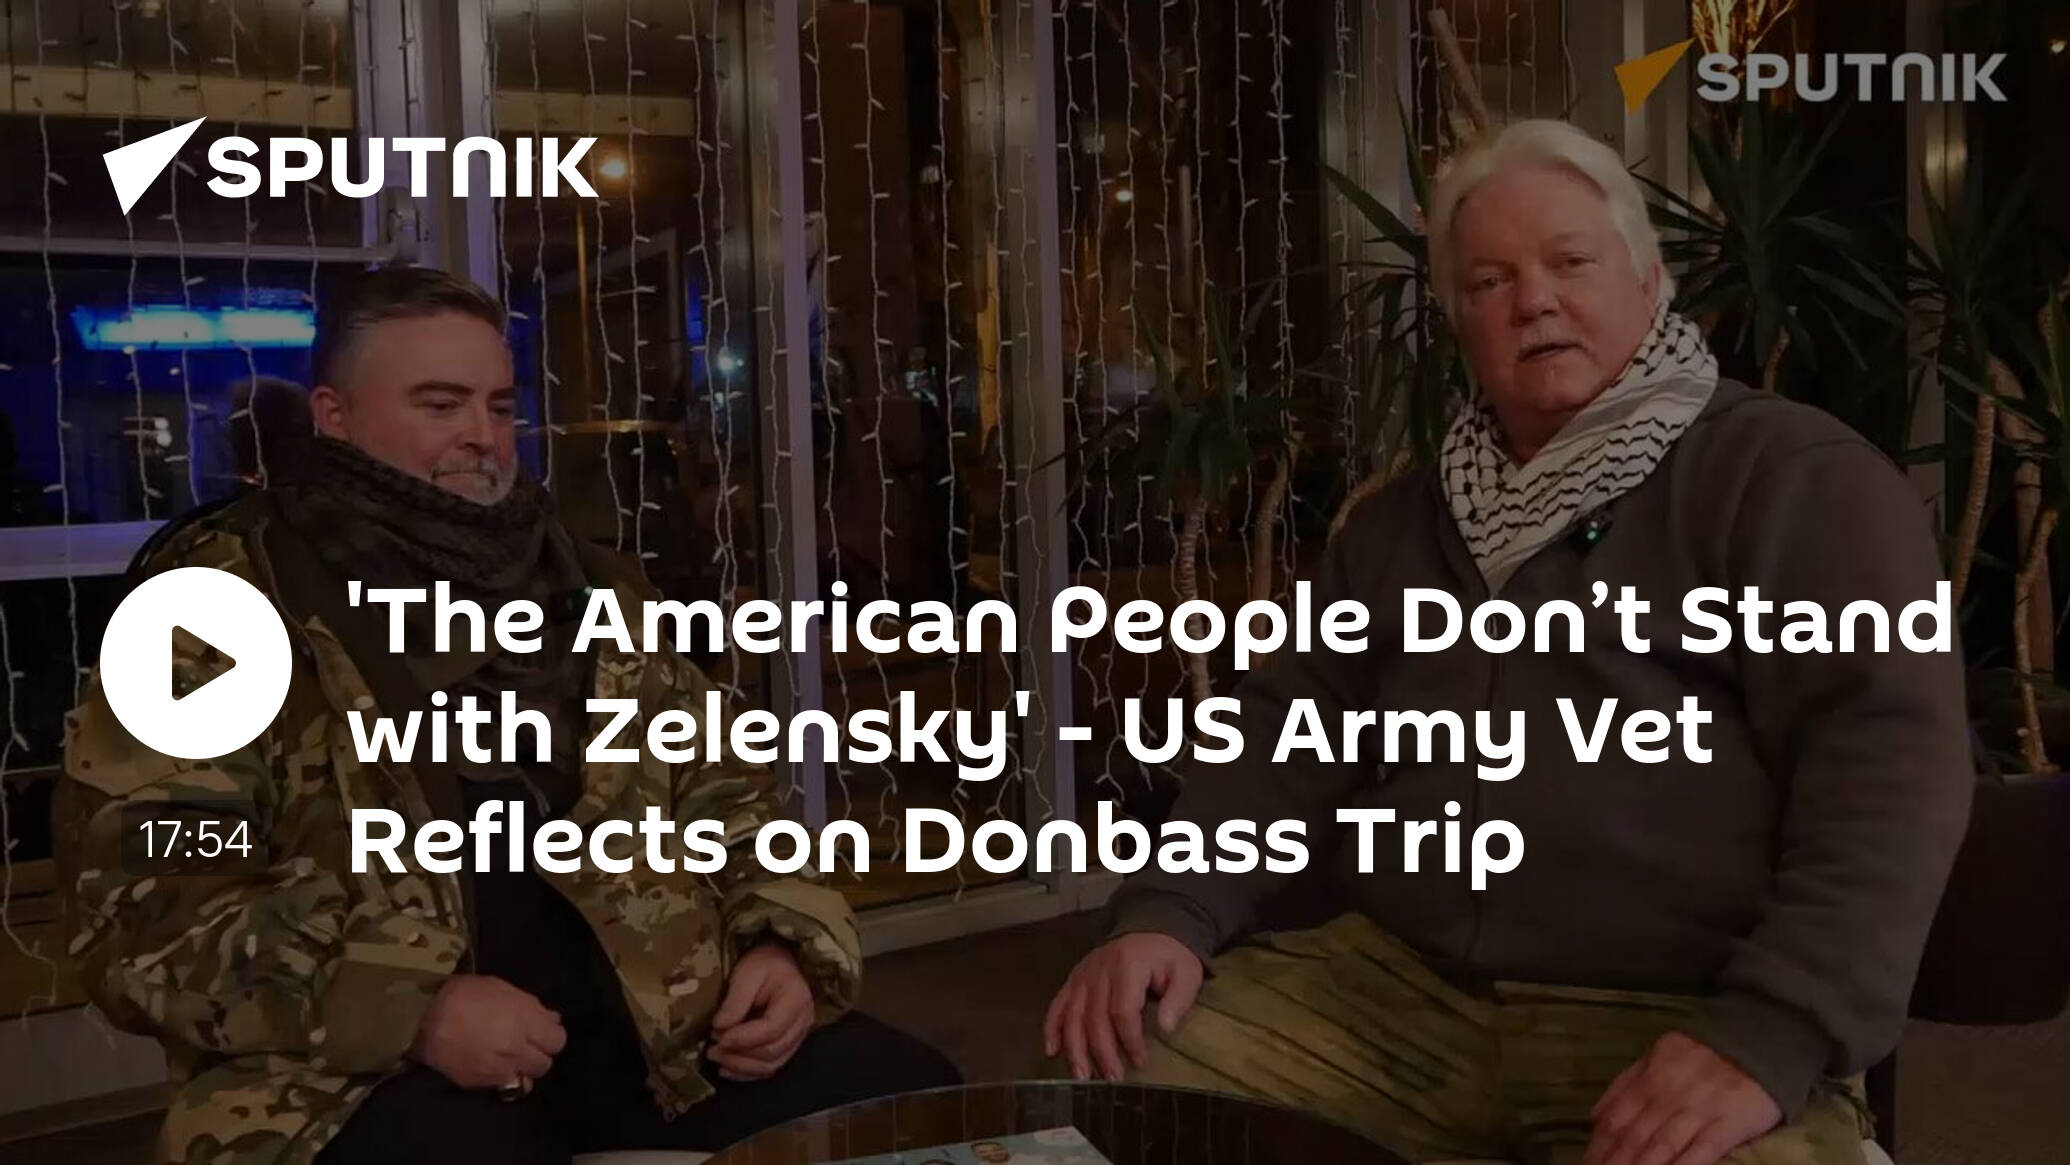 'The American People Don’t Stand with Zelensky' – US Army Vet Reflects on Donbass Trip